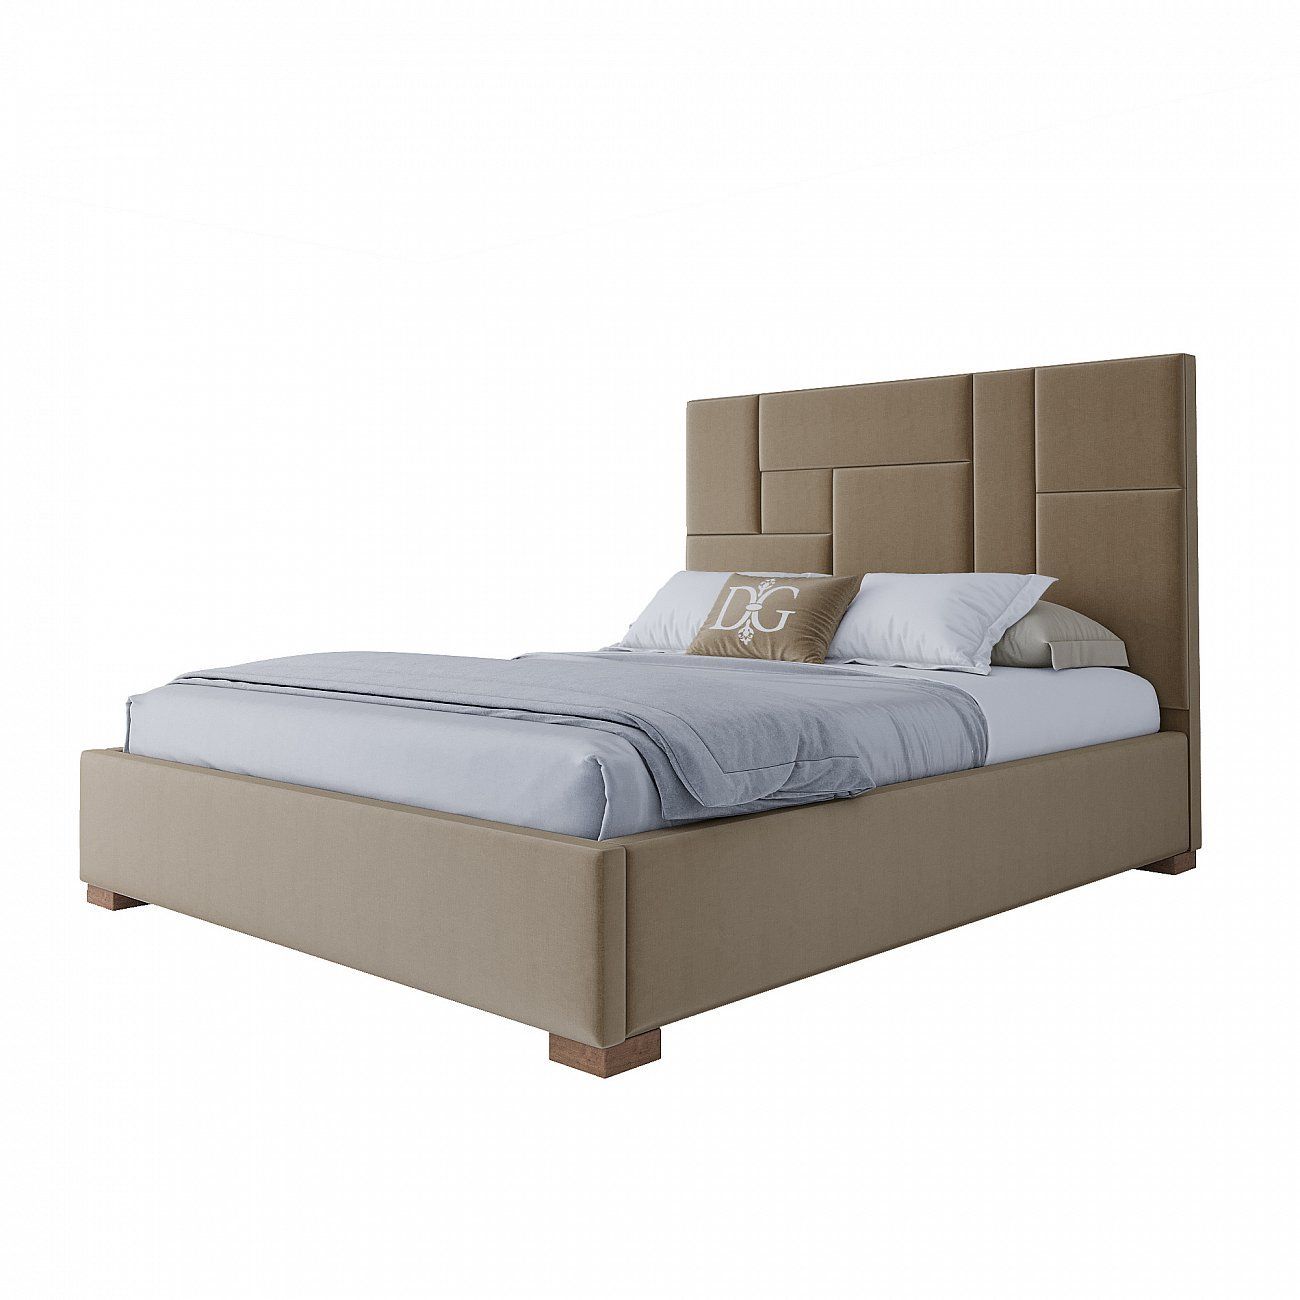 Double bed with upholstered headboard 160x200 cm beige Wax